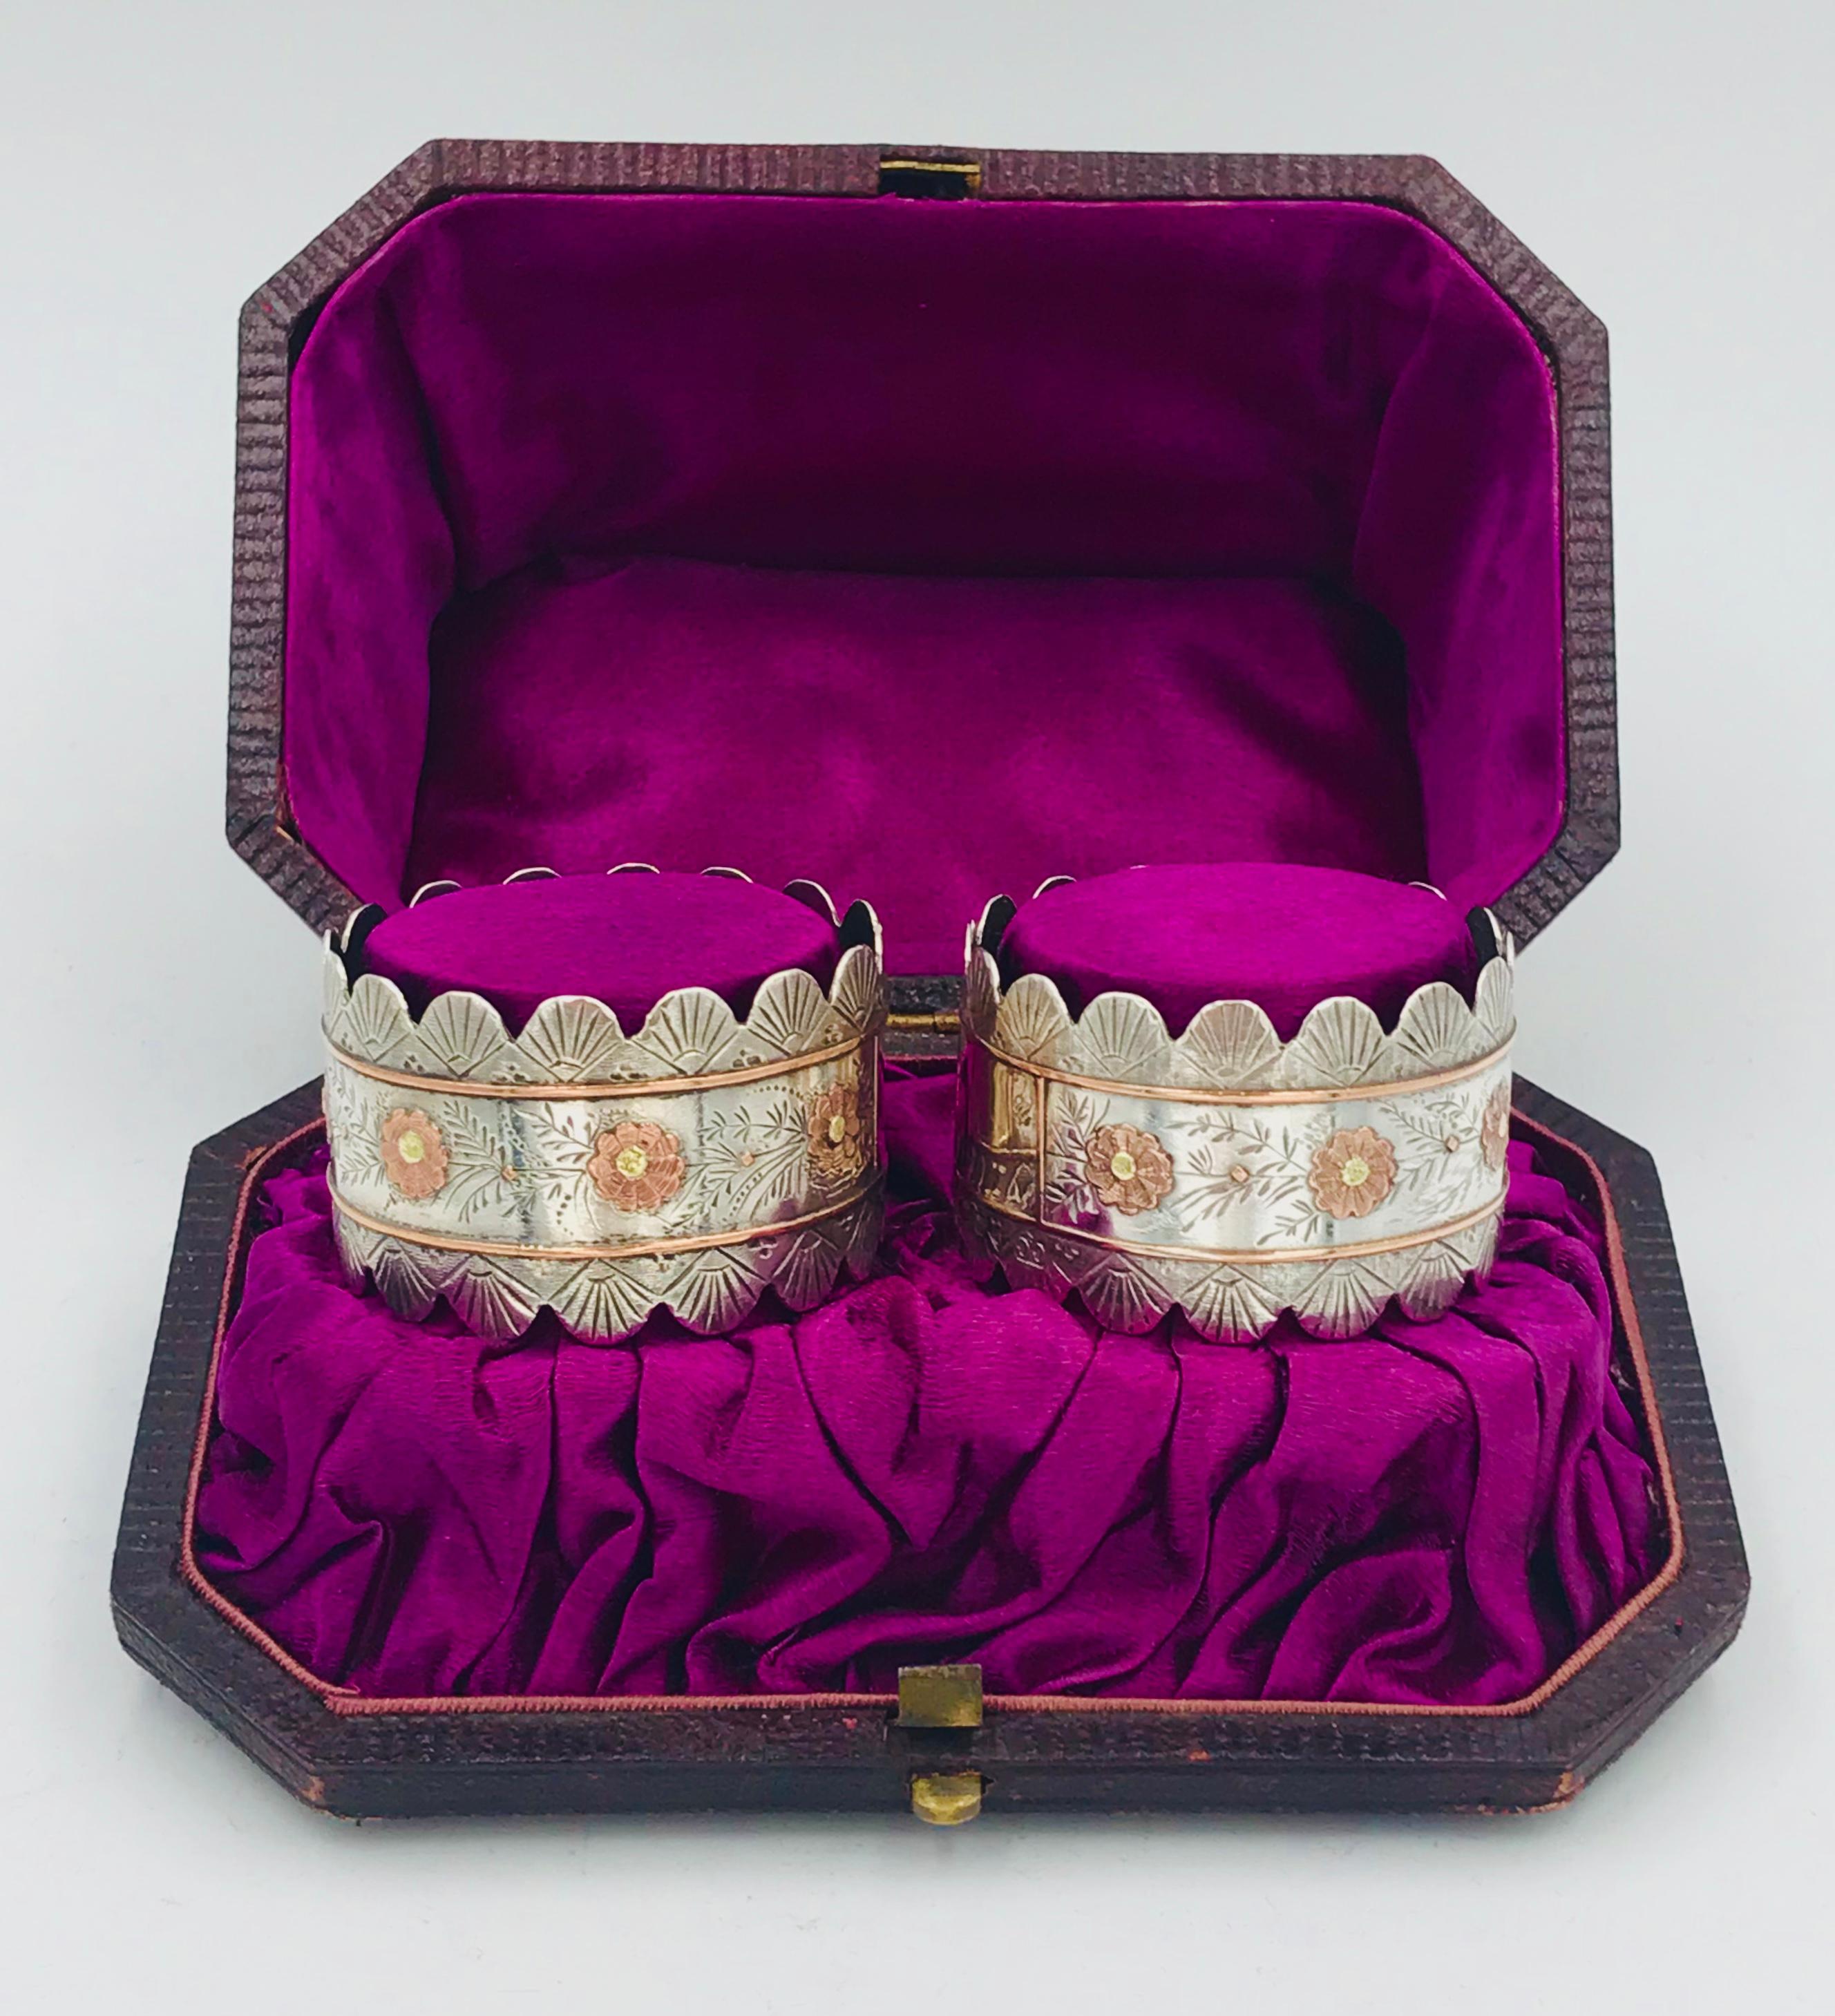 A fantastic pair of Victorian napkin rings in original fitted case.
Beautifully engraved, with gold inlay.
Made in Birmingham, 1880.